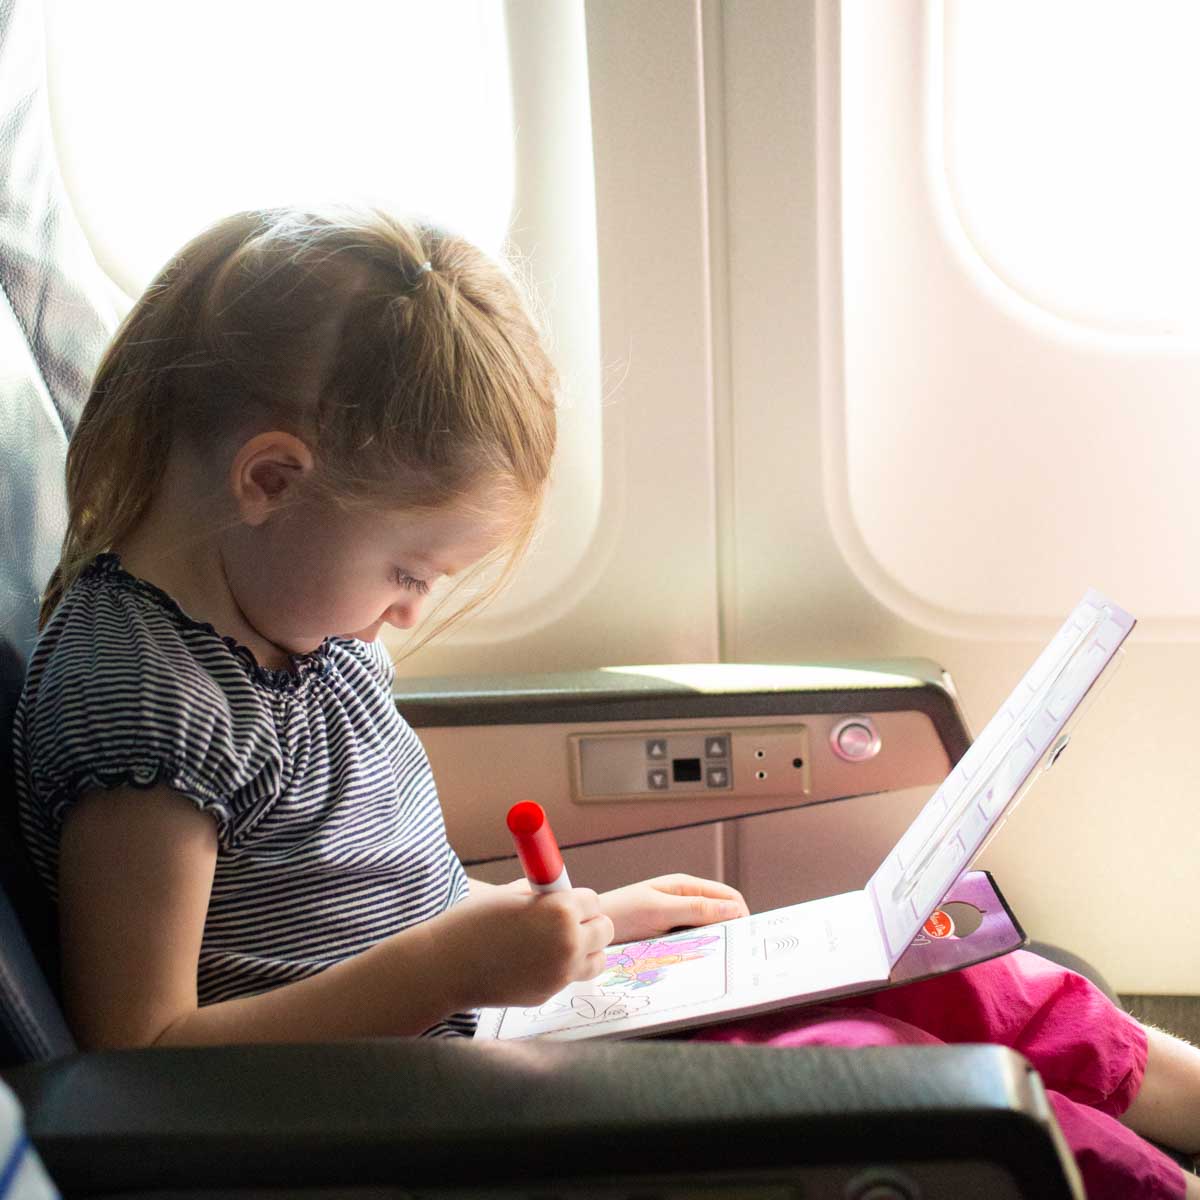 A young girl sits on an airplane and is coloring in her seat.